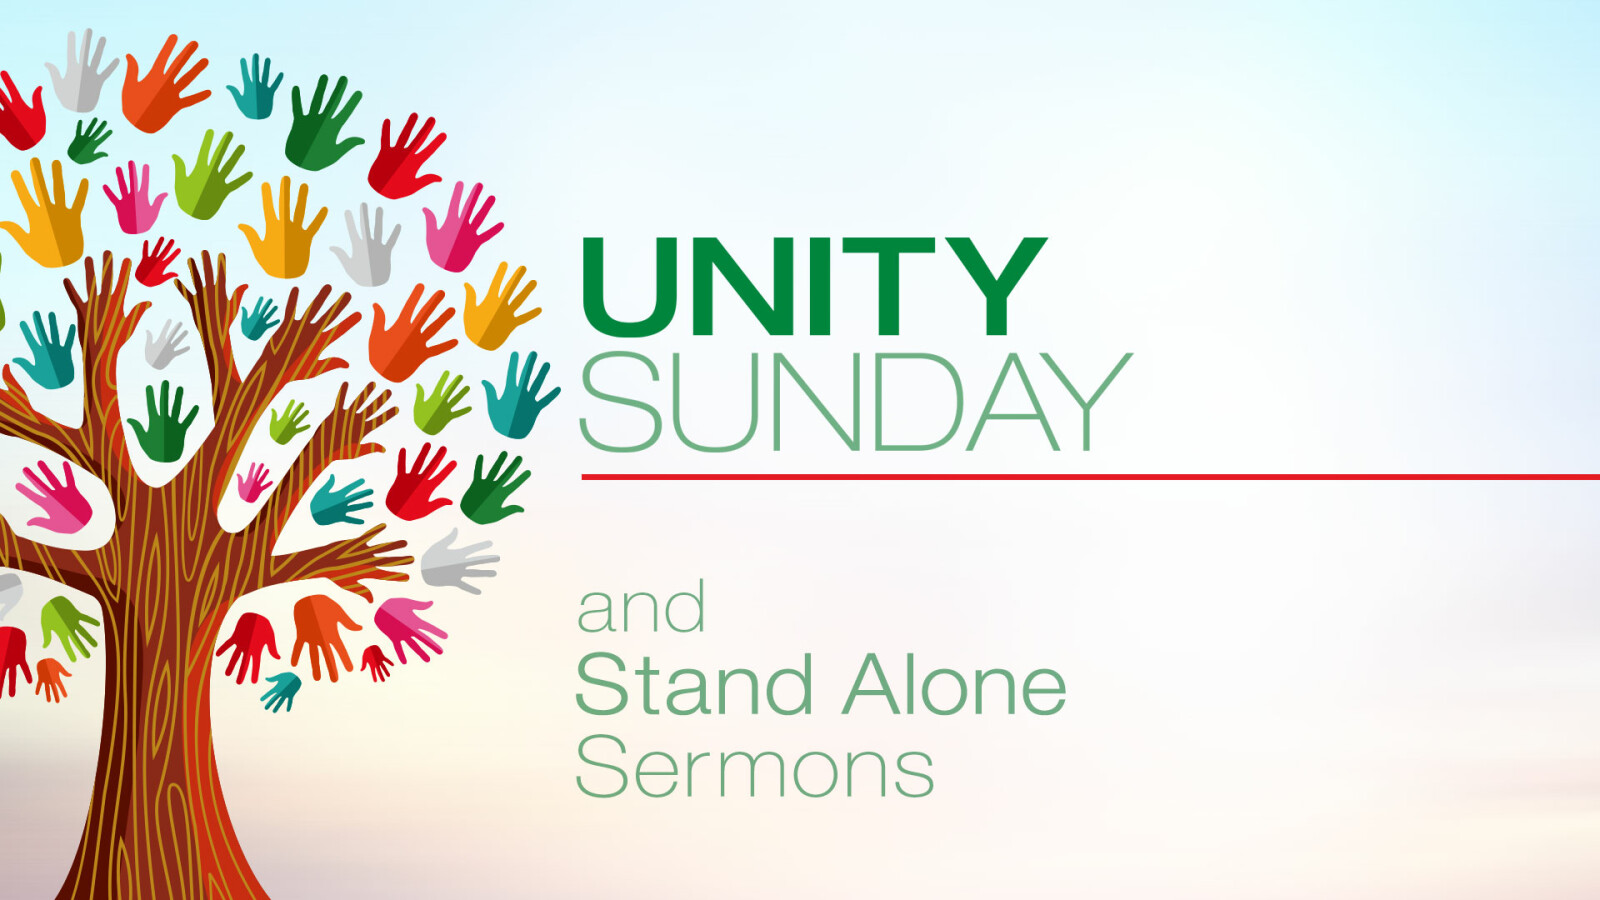 Unity Sunday and Thanksgiving Focus